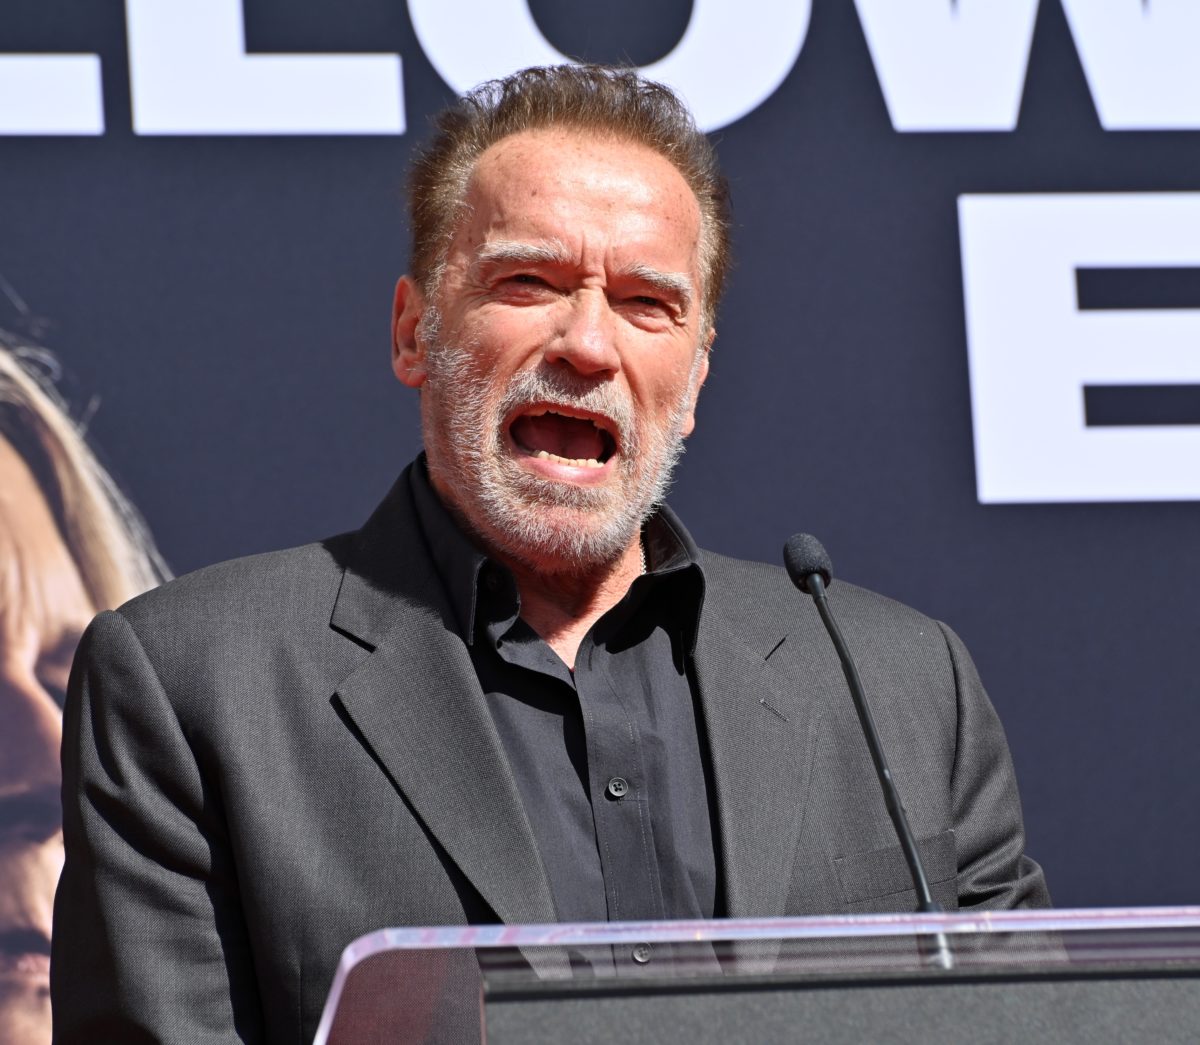 Arnold Schwarzenegger Relives the Moment He Told His Ex-Wife, Maria Shriver, He Cheated on Her With Their Housekeeper